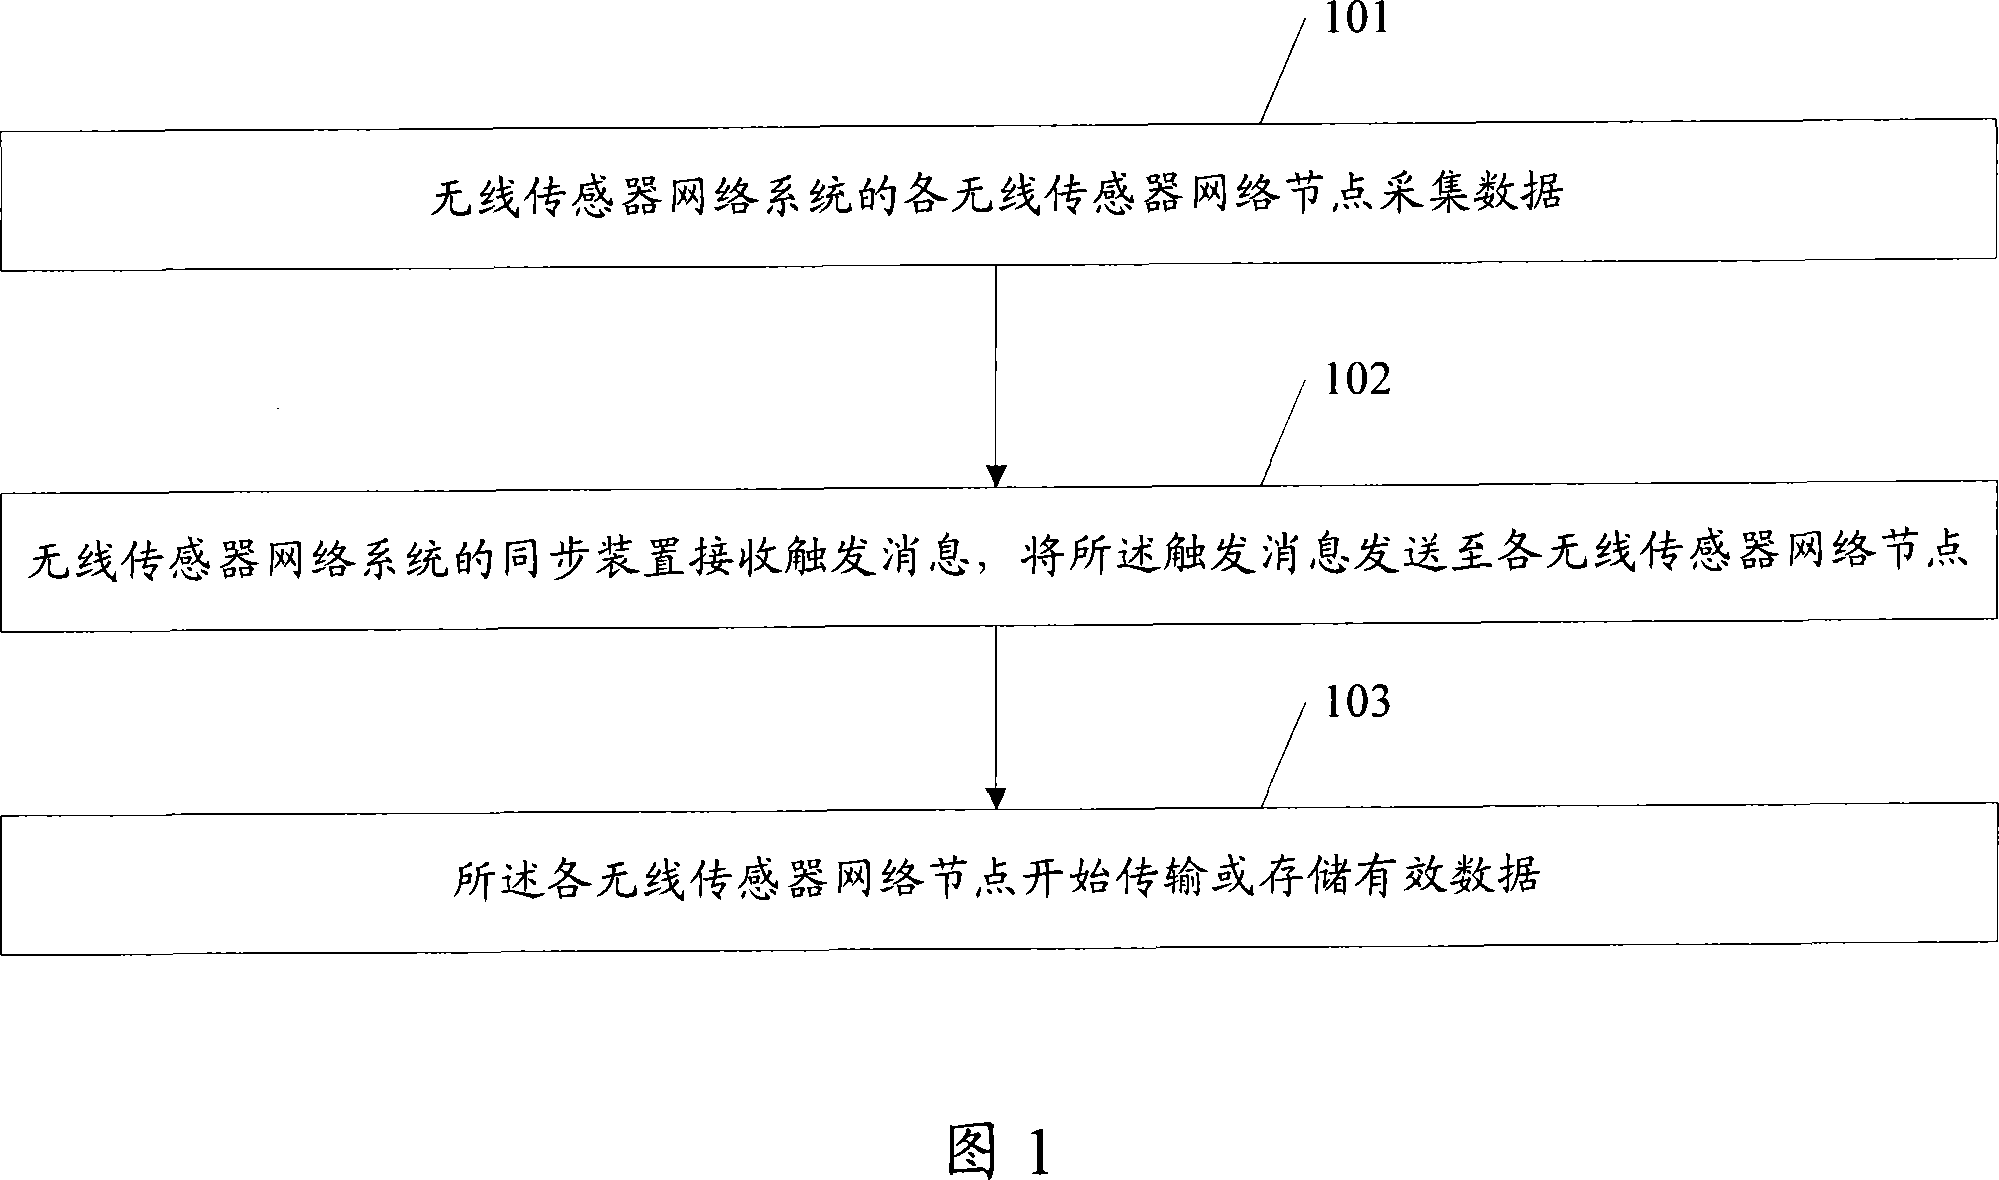 Method for implementing synchronizing collection, wireless sensor network system and synchronizing apparatus